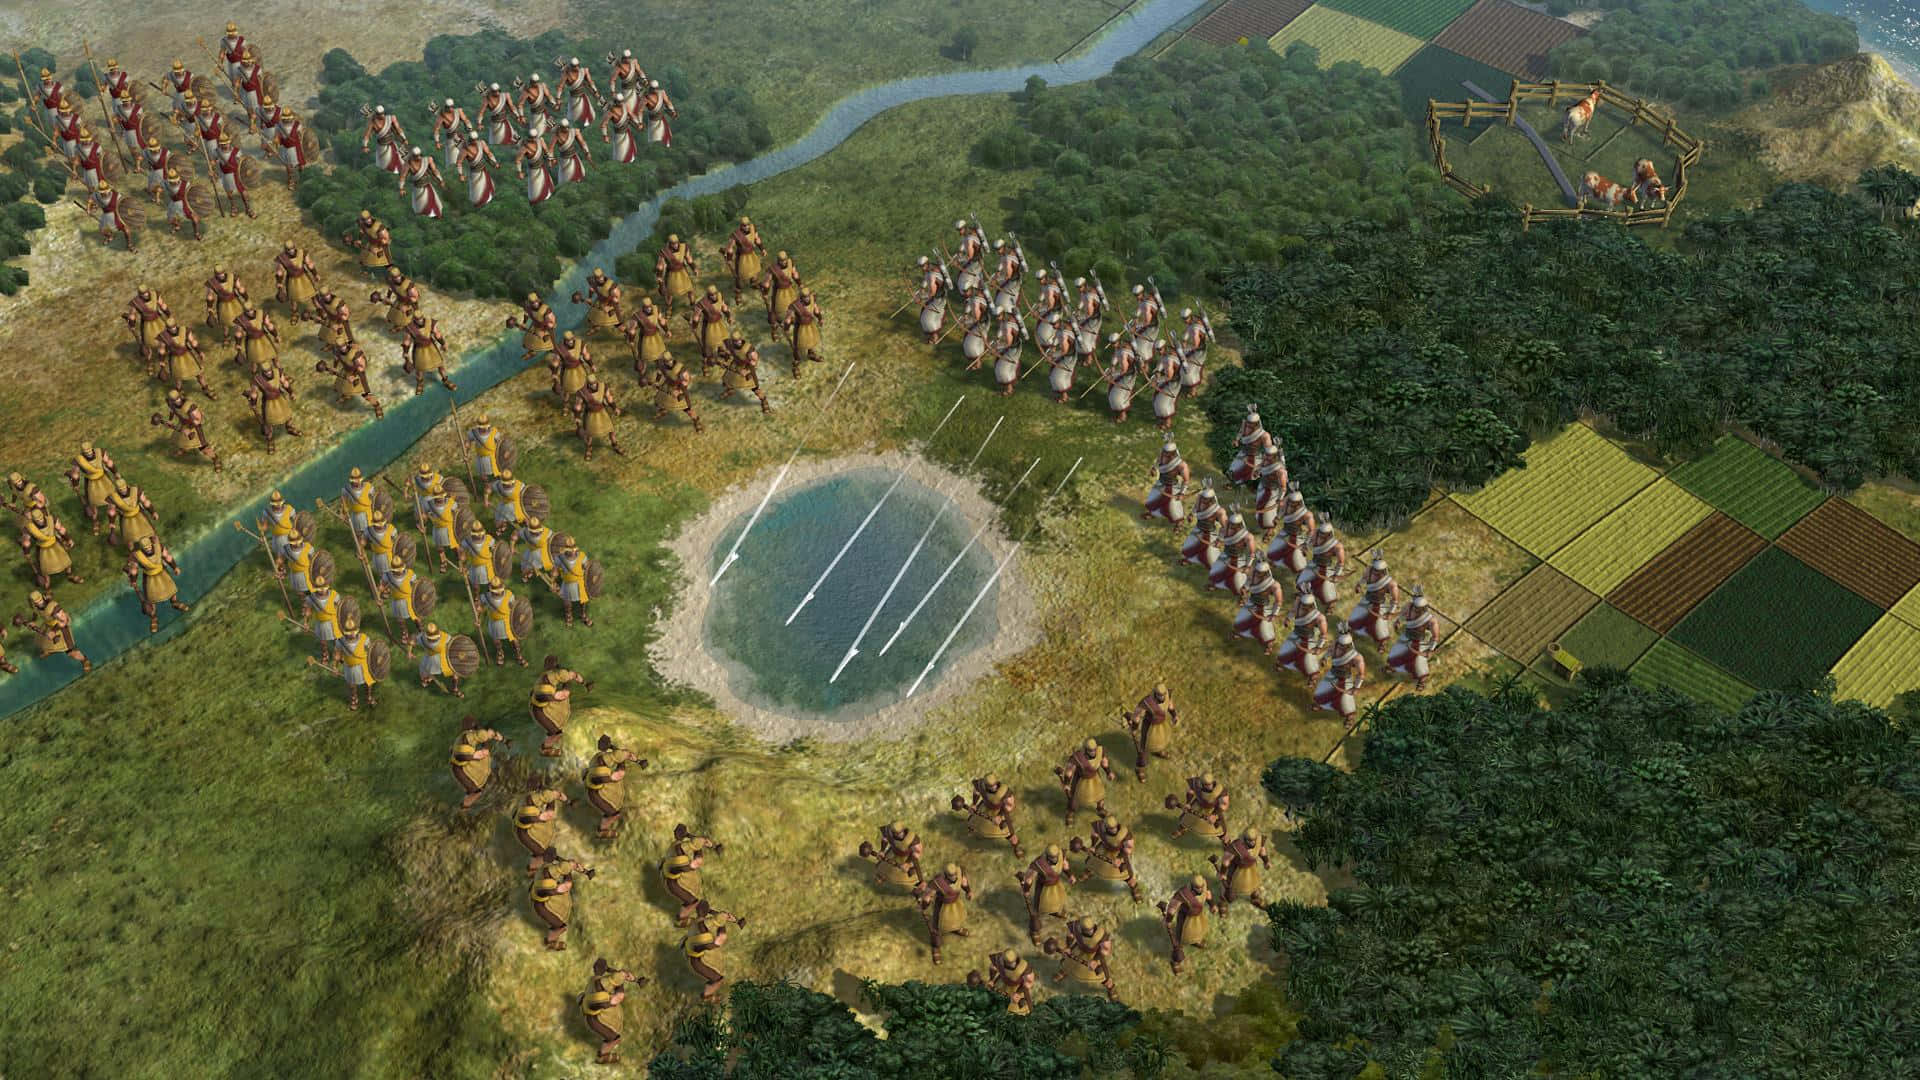 Explore the World of Civilization V in Stunning 1080p